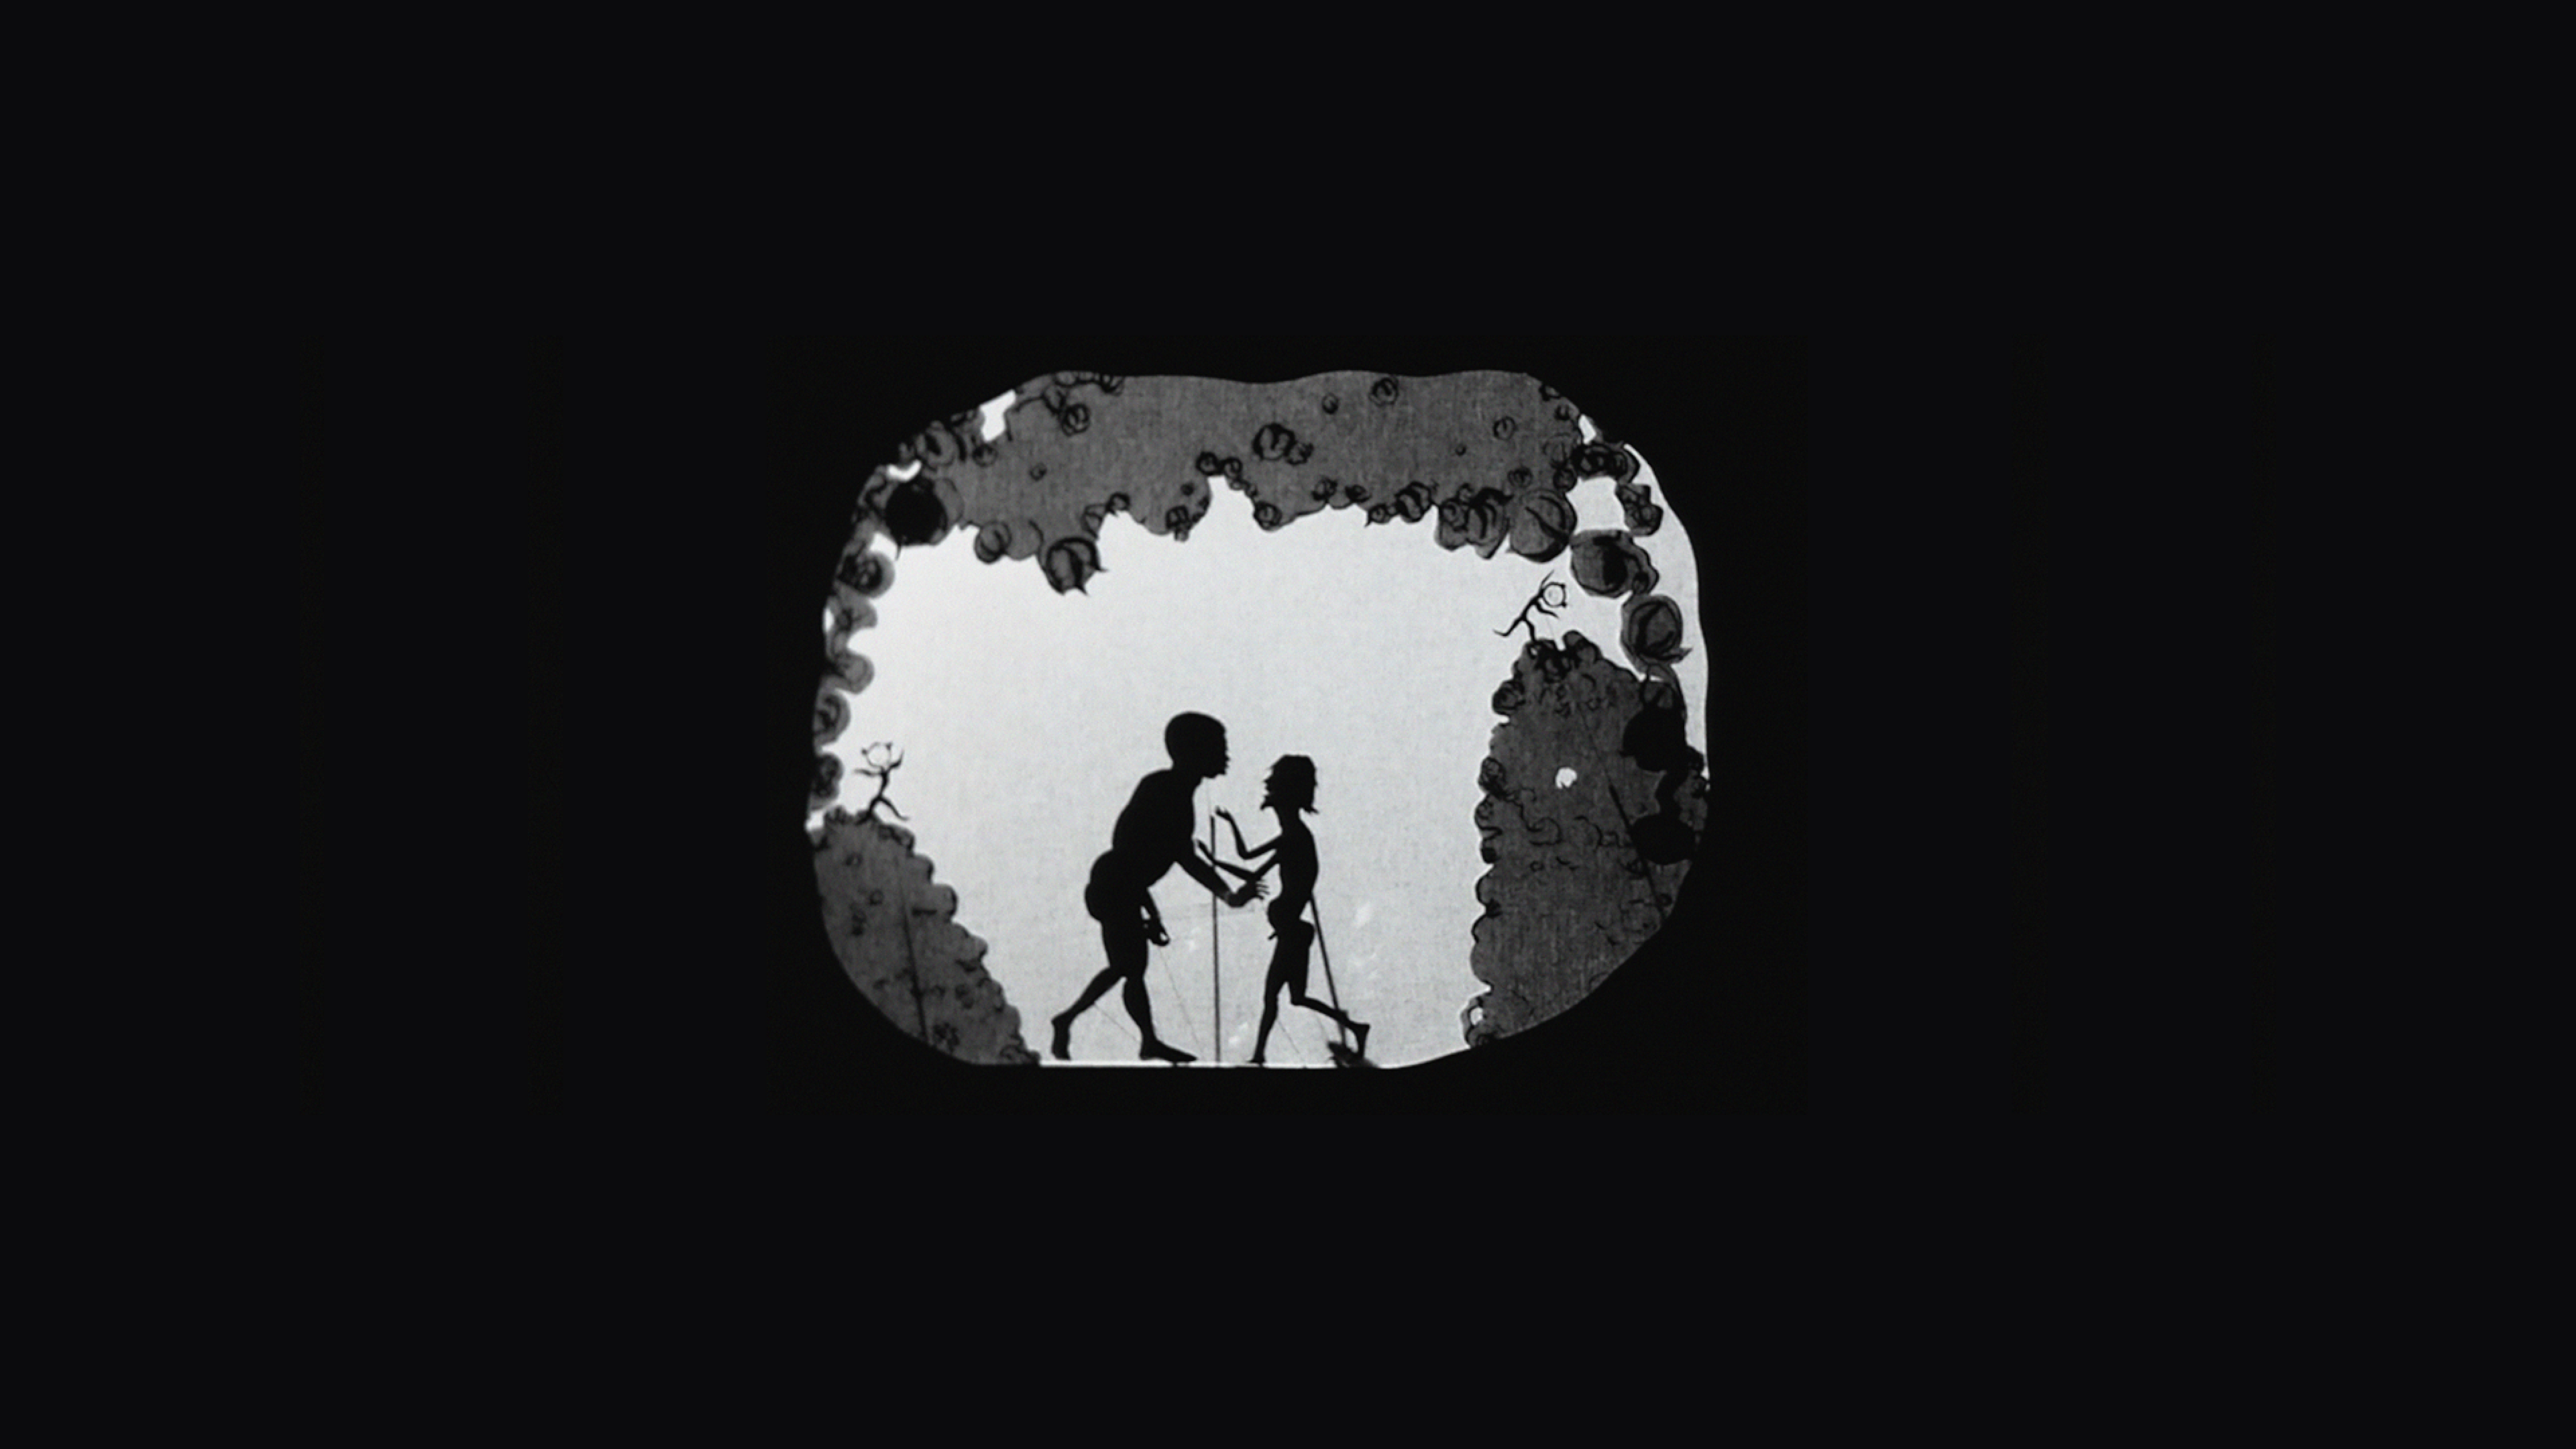 Image credit: Kara E. Walker, “8 Possible Beginnings or: The Creation of African-America,” 16mm transferred to video (black and white, sound), 15 mins. 57 secs, 2005, Courtesy of Kadist Foundation and artist.